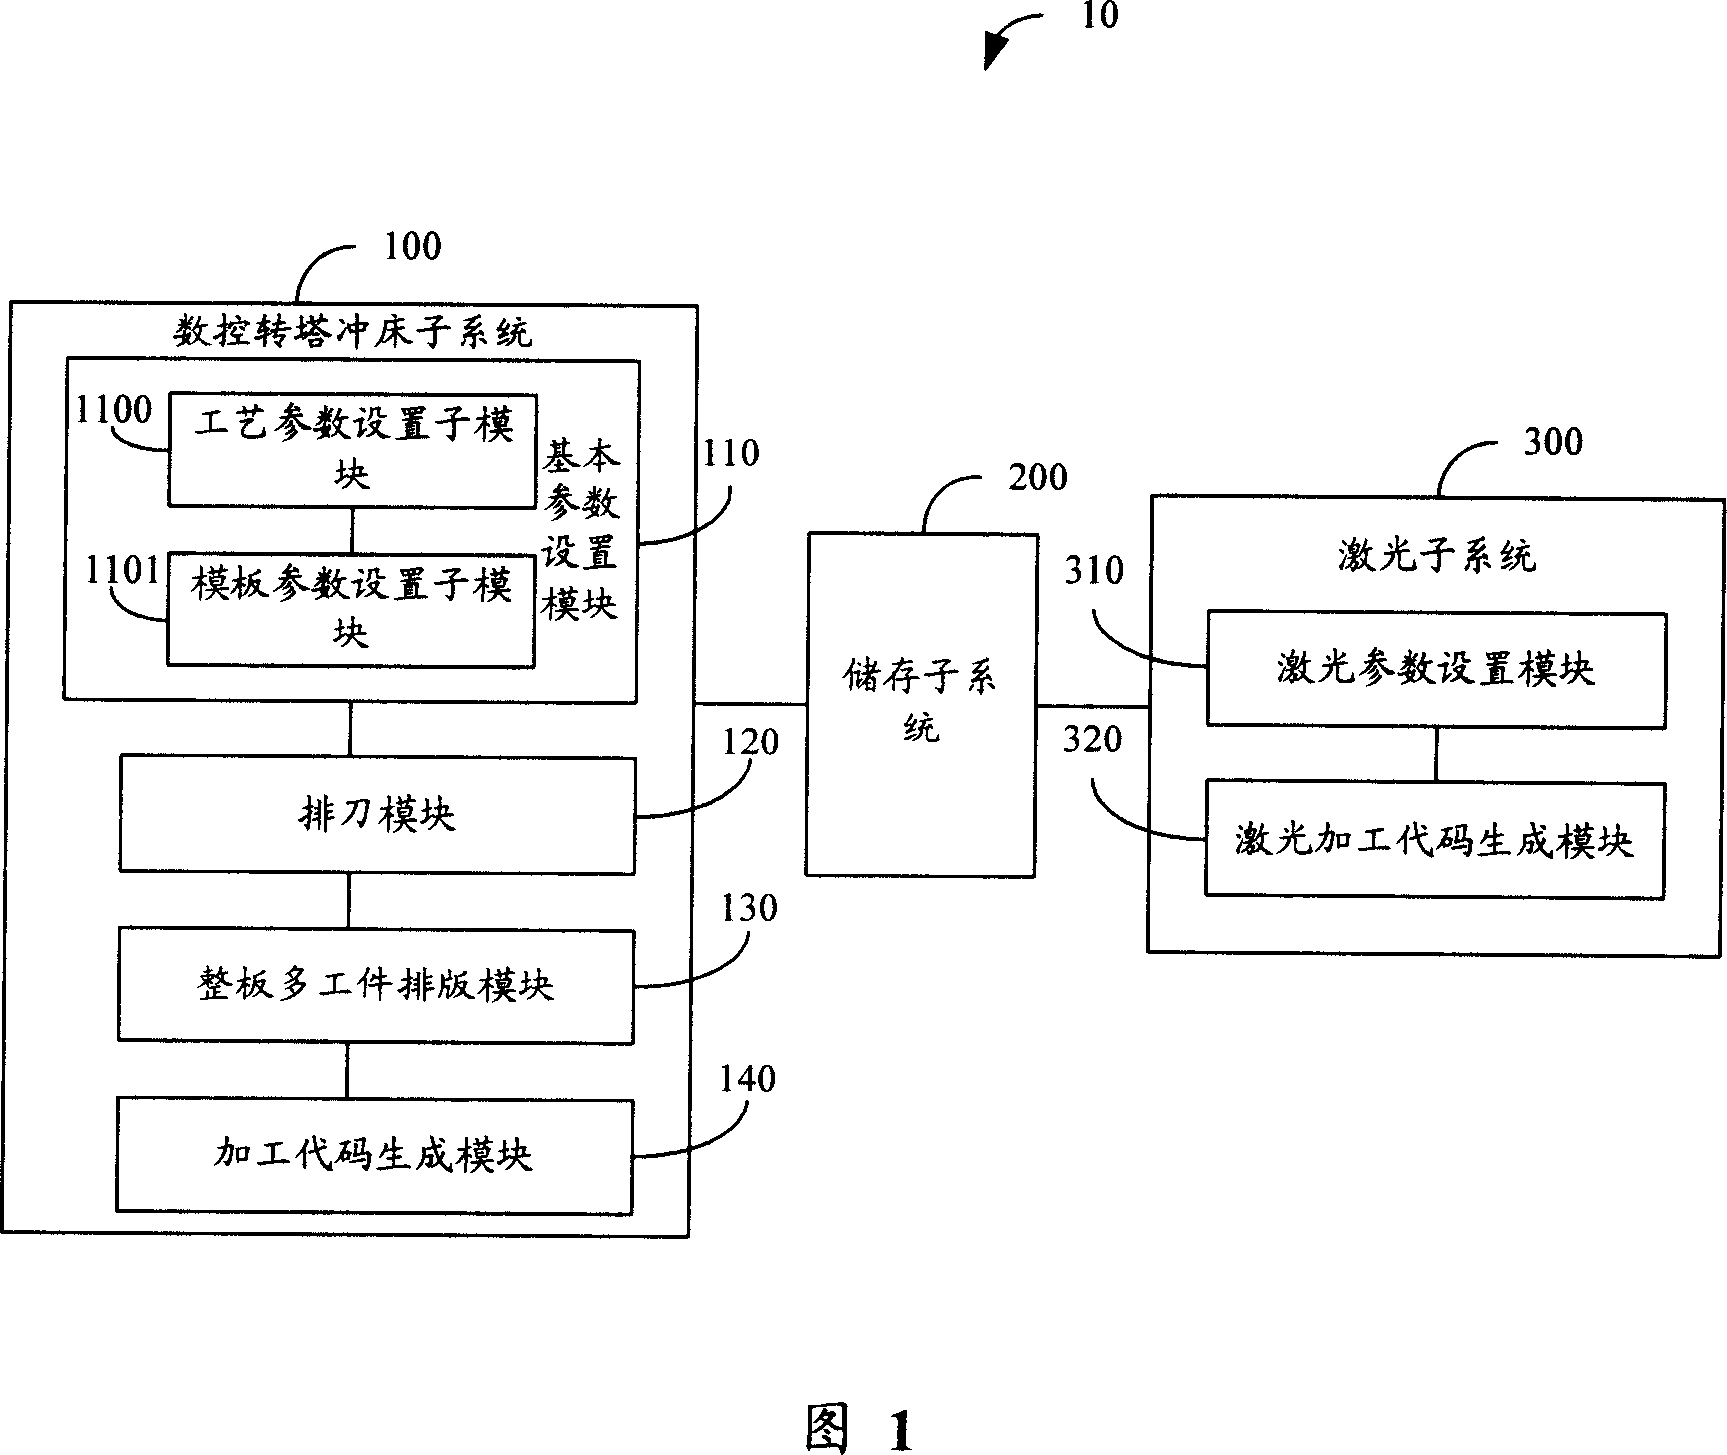 Metal plank blanking system and method